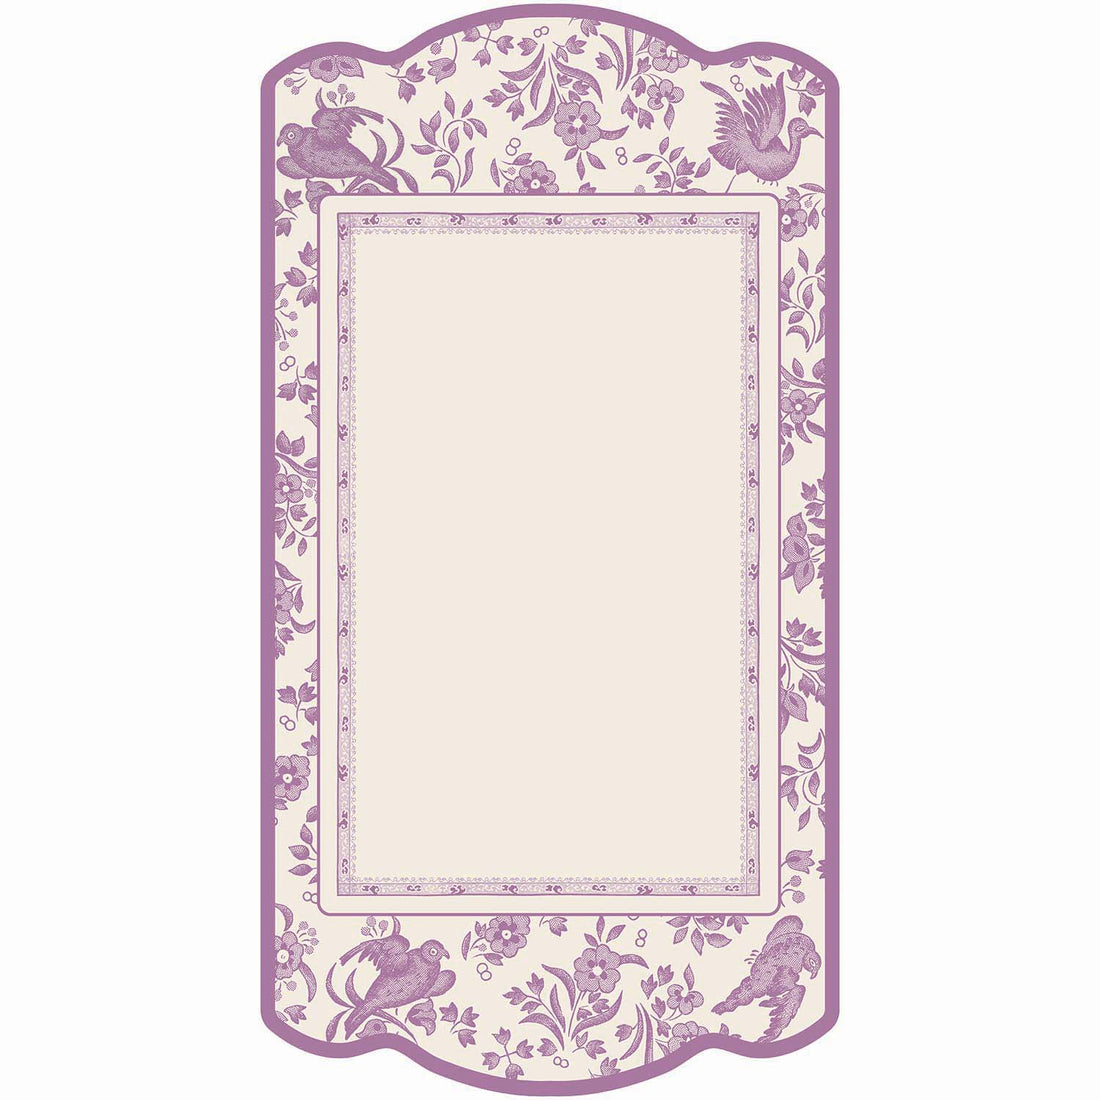 A Lilac Regal Peacock Table Card with a floral design by Hester &amp; Cook.